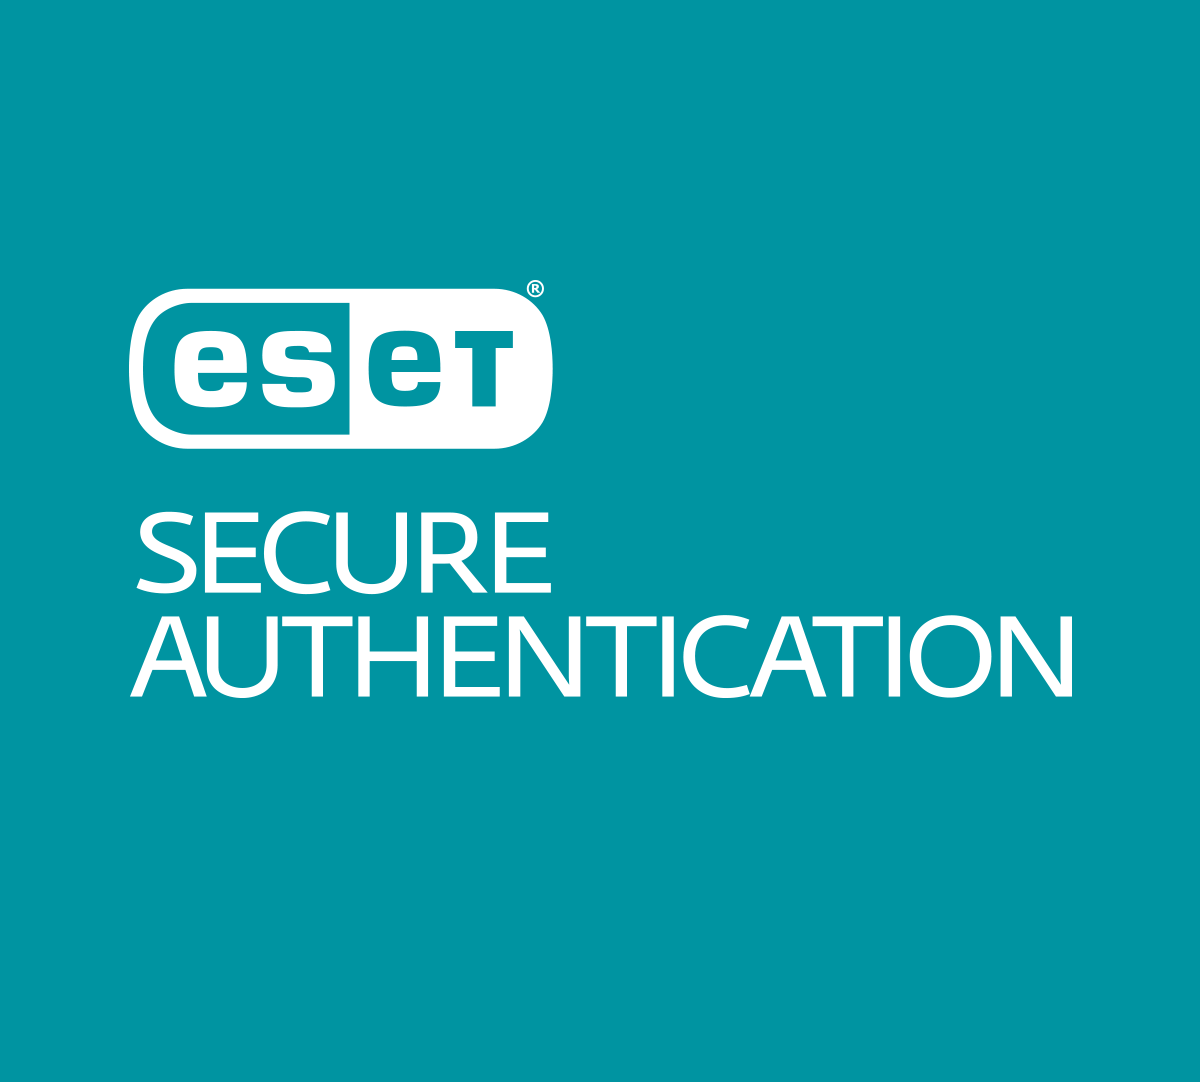 ESET Secure Authentication Product Overview